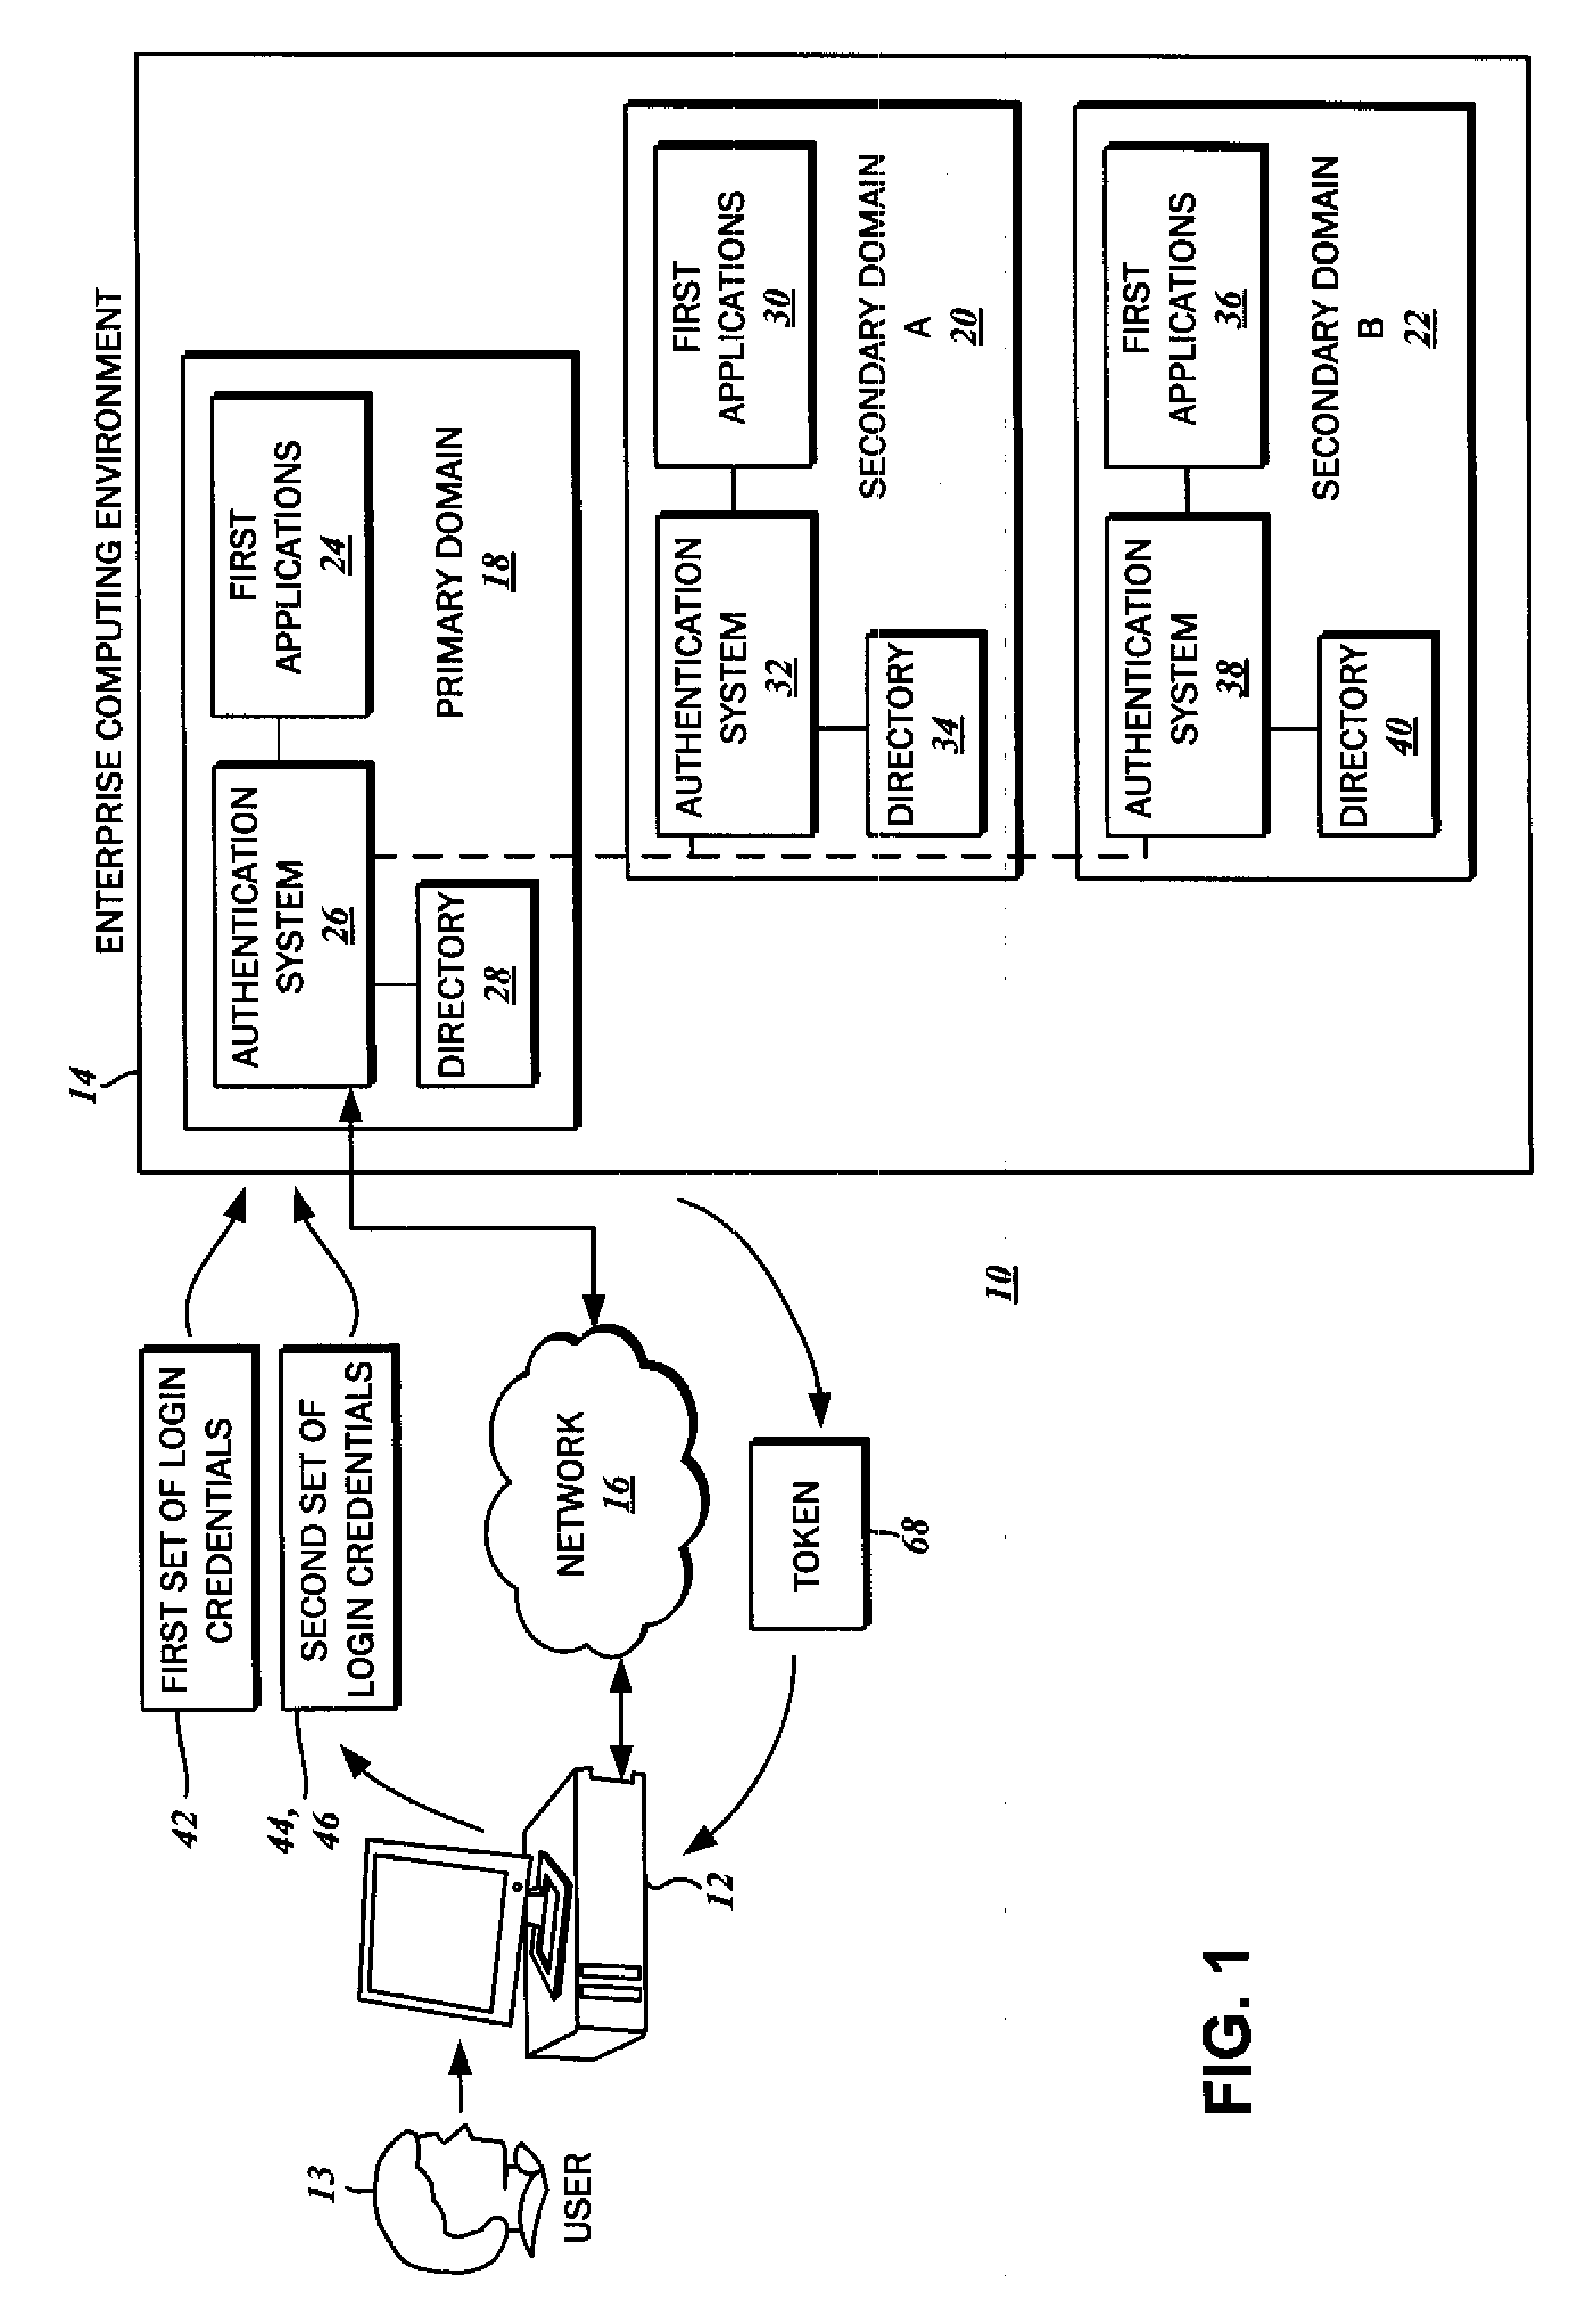 Single sign on with multiple authentication factors